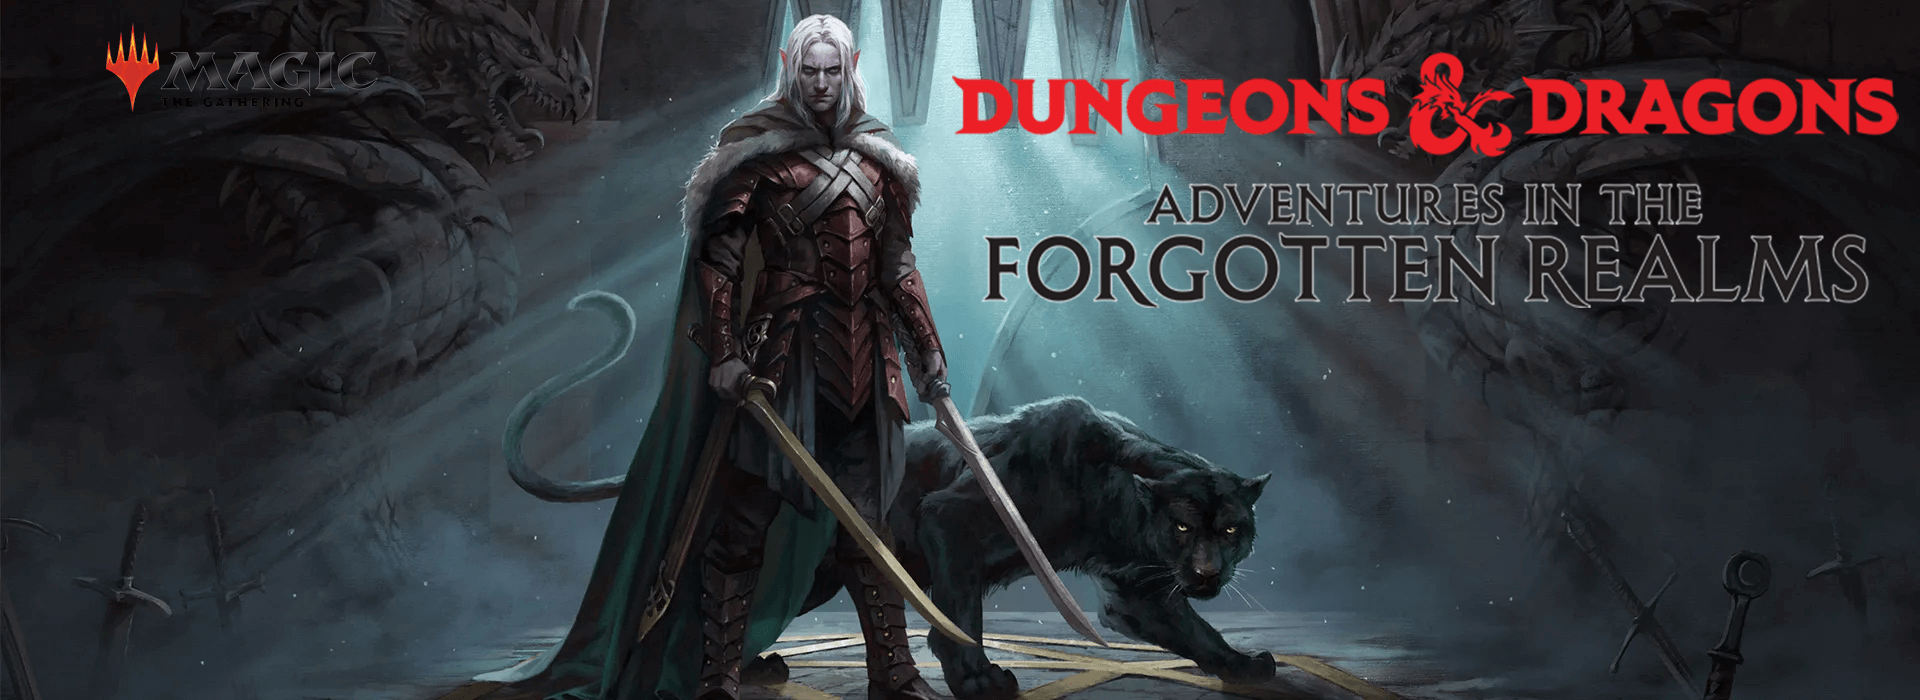 Dungeons And Dragons Adventures In The Forgotten Realms